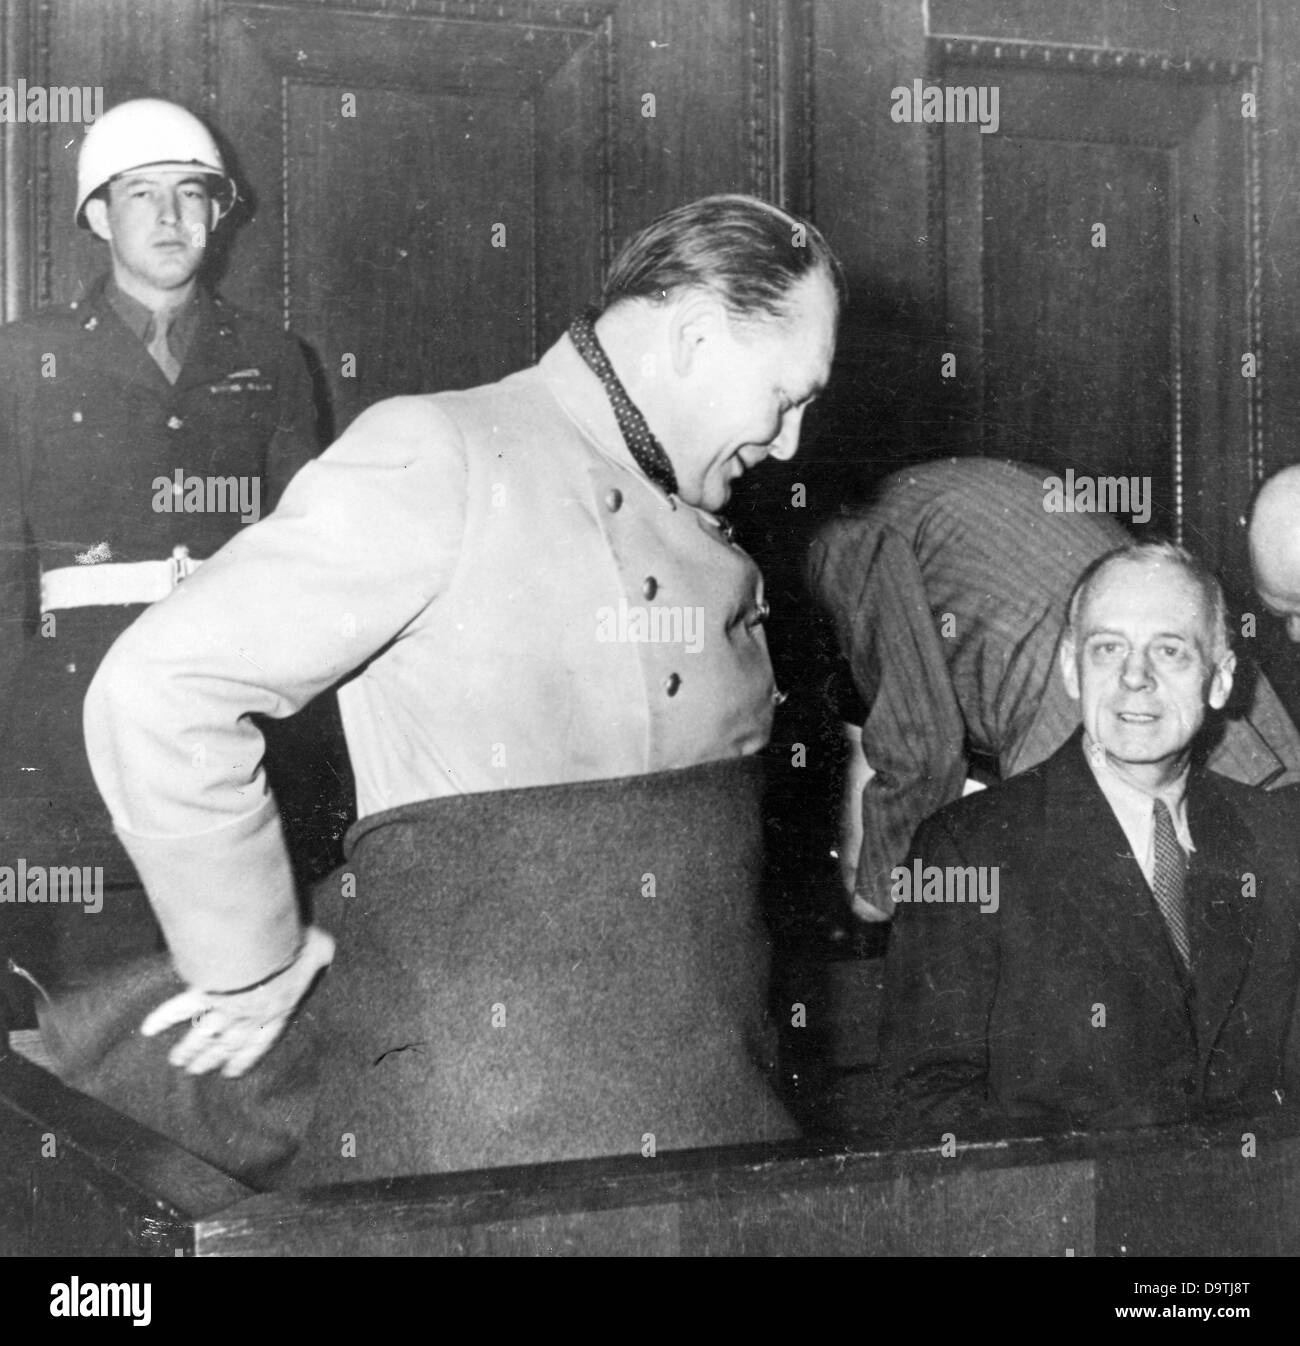 The Nazi war criminal Hermann Göring (l) and the former German Foreign Minister Joachim von Ribbertrop are pcitured in the dock during the Nuremberg Trials in the context of the International Military Tribunal against the major war criminals of World War II in Nuremberg, Germany, in 1946. The photo was taken by the Soviet photographer Yevgeny Khaldei, who was commissioned by the USSR to cover the trials. Photo: Yevgeny Khaldei Stock Photo